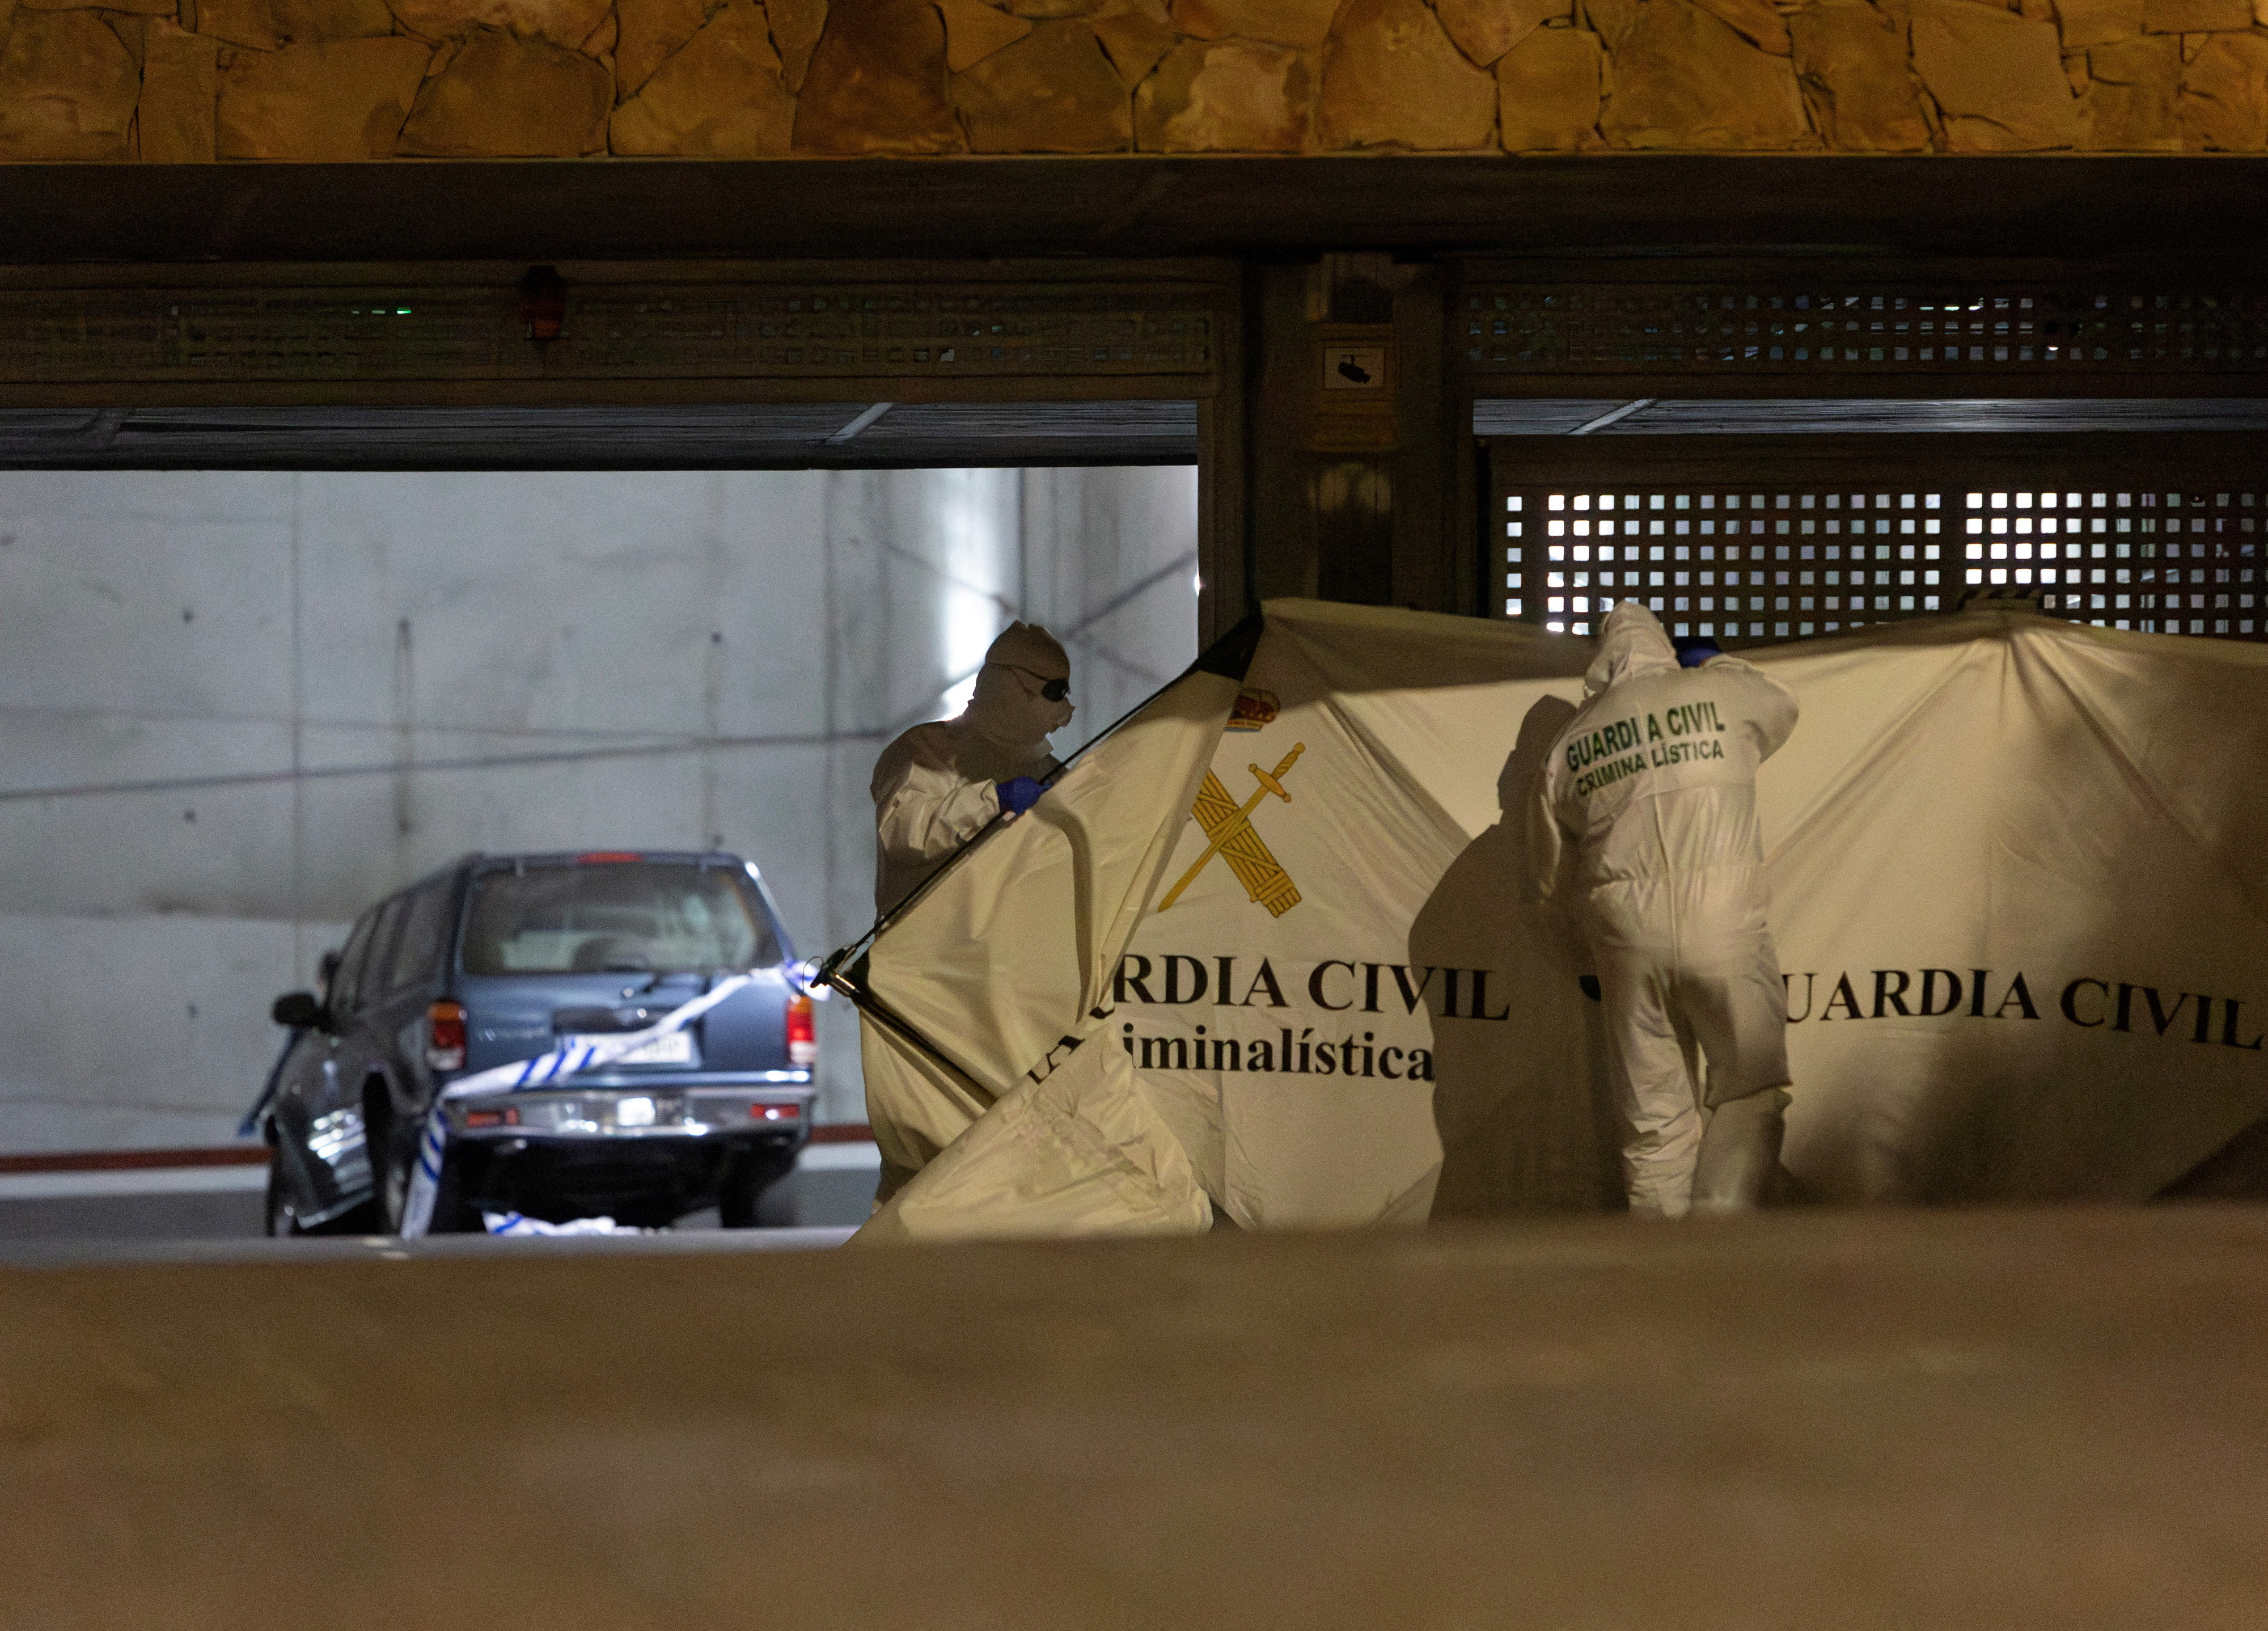 Spanish Civil Guard officers investigate the garage Kuzminov's bullet-riddled body was found